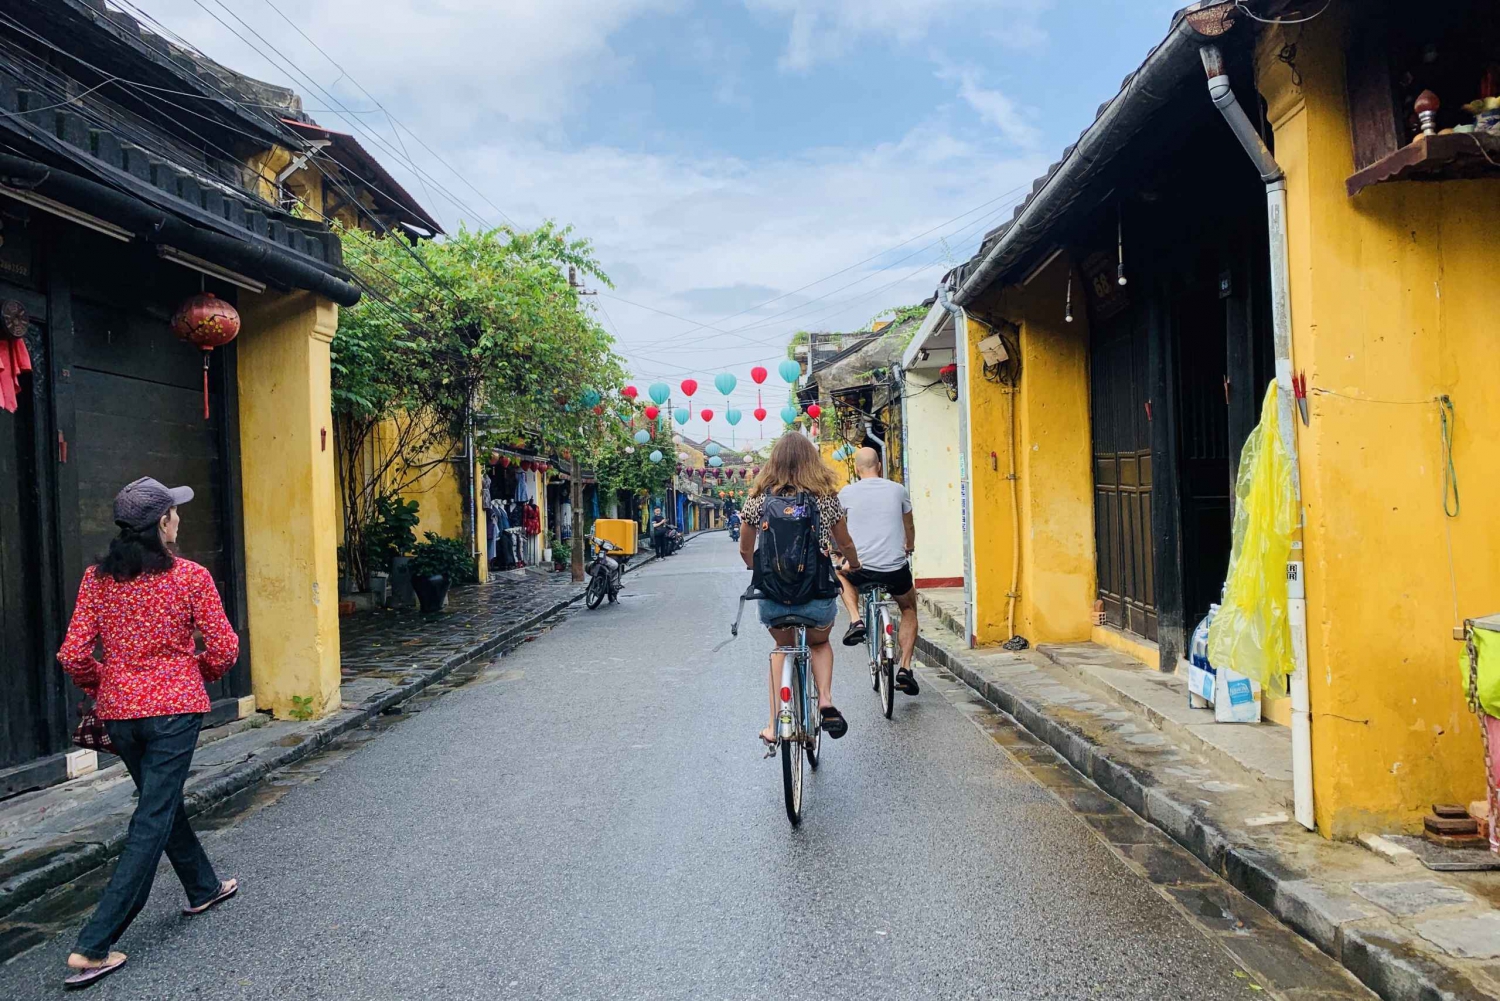 Hoi An: Full-Day Marble Mountain and Ancient Town Tour